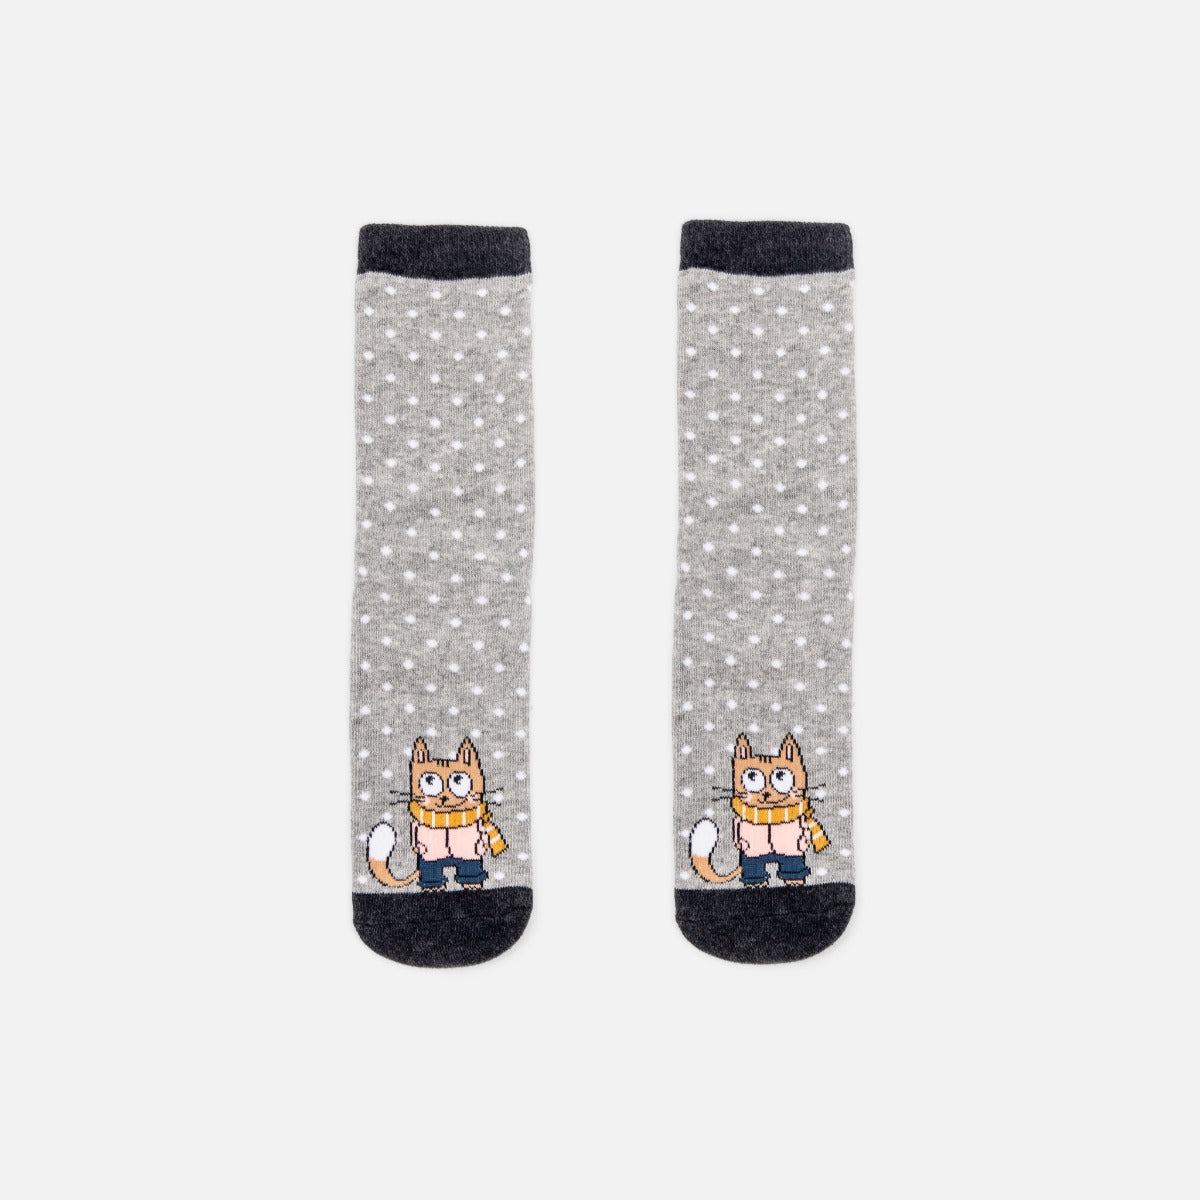 Grey socks with little white polka dots and cat with scarf 